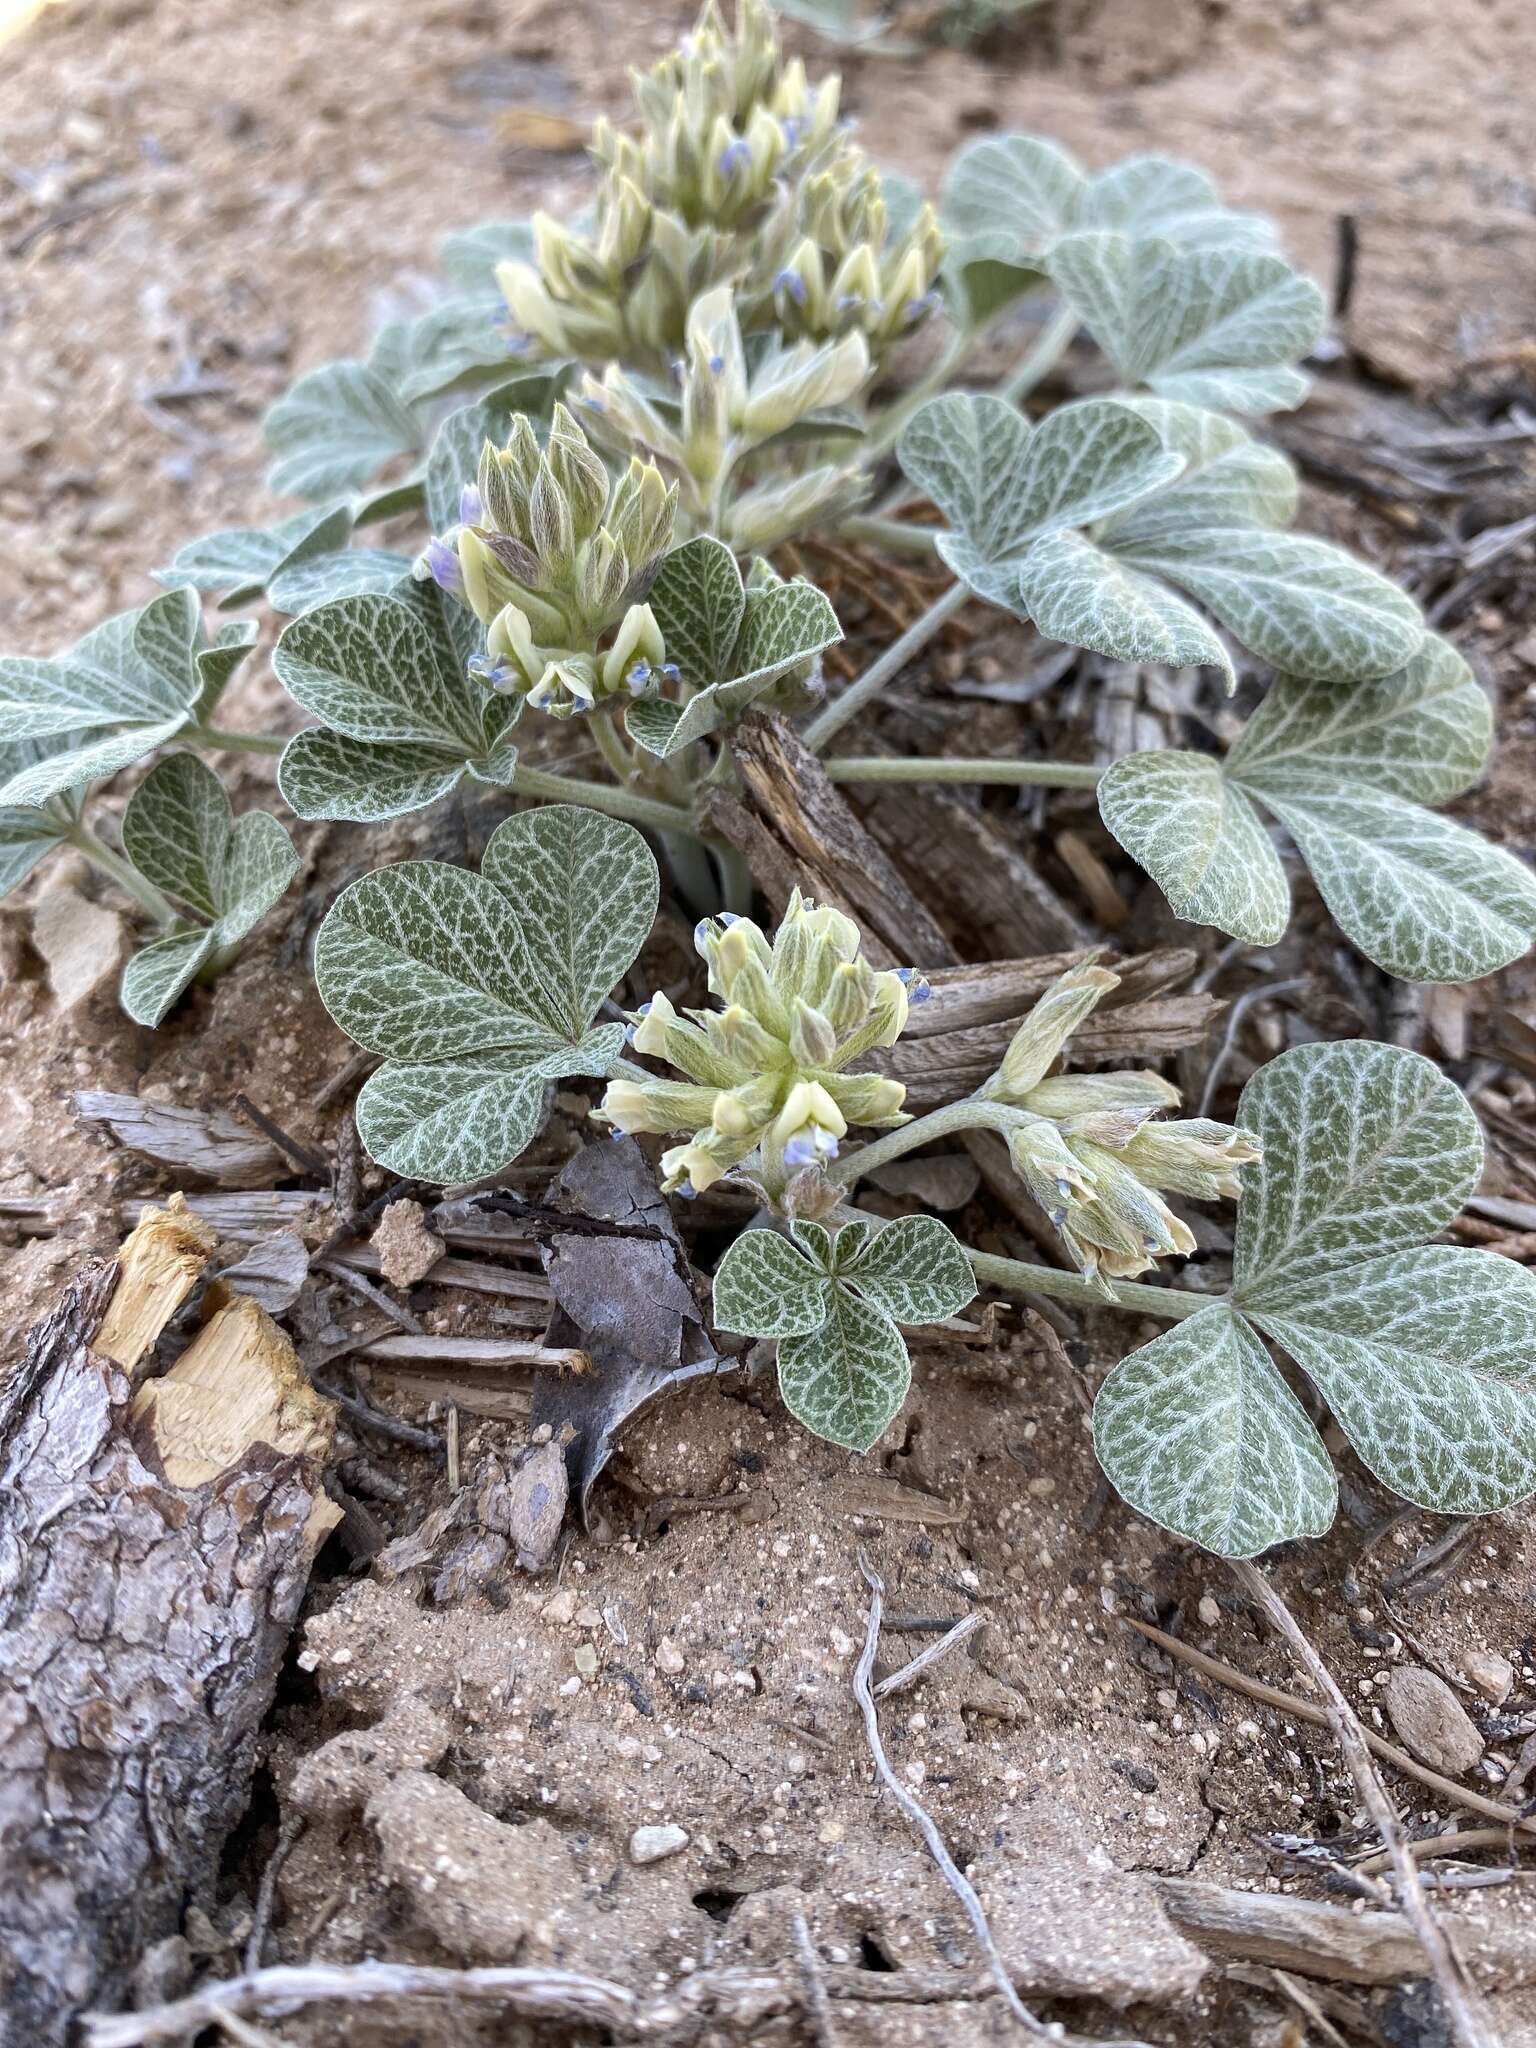 Image of Paria River Indian breadroot